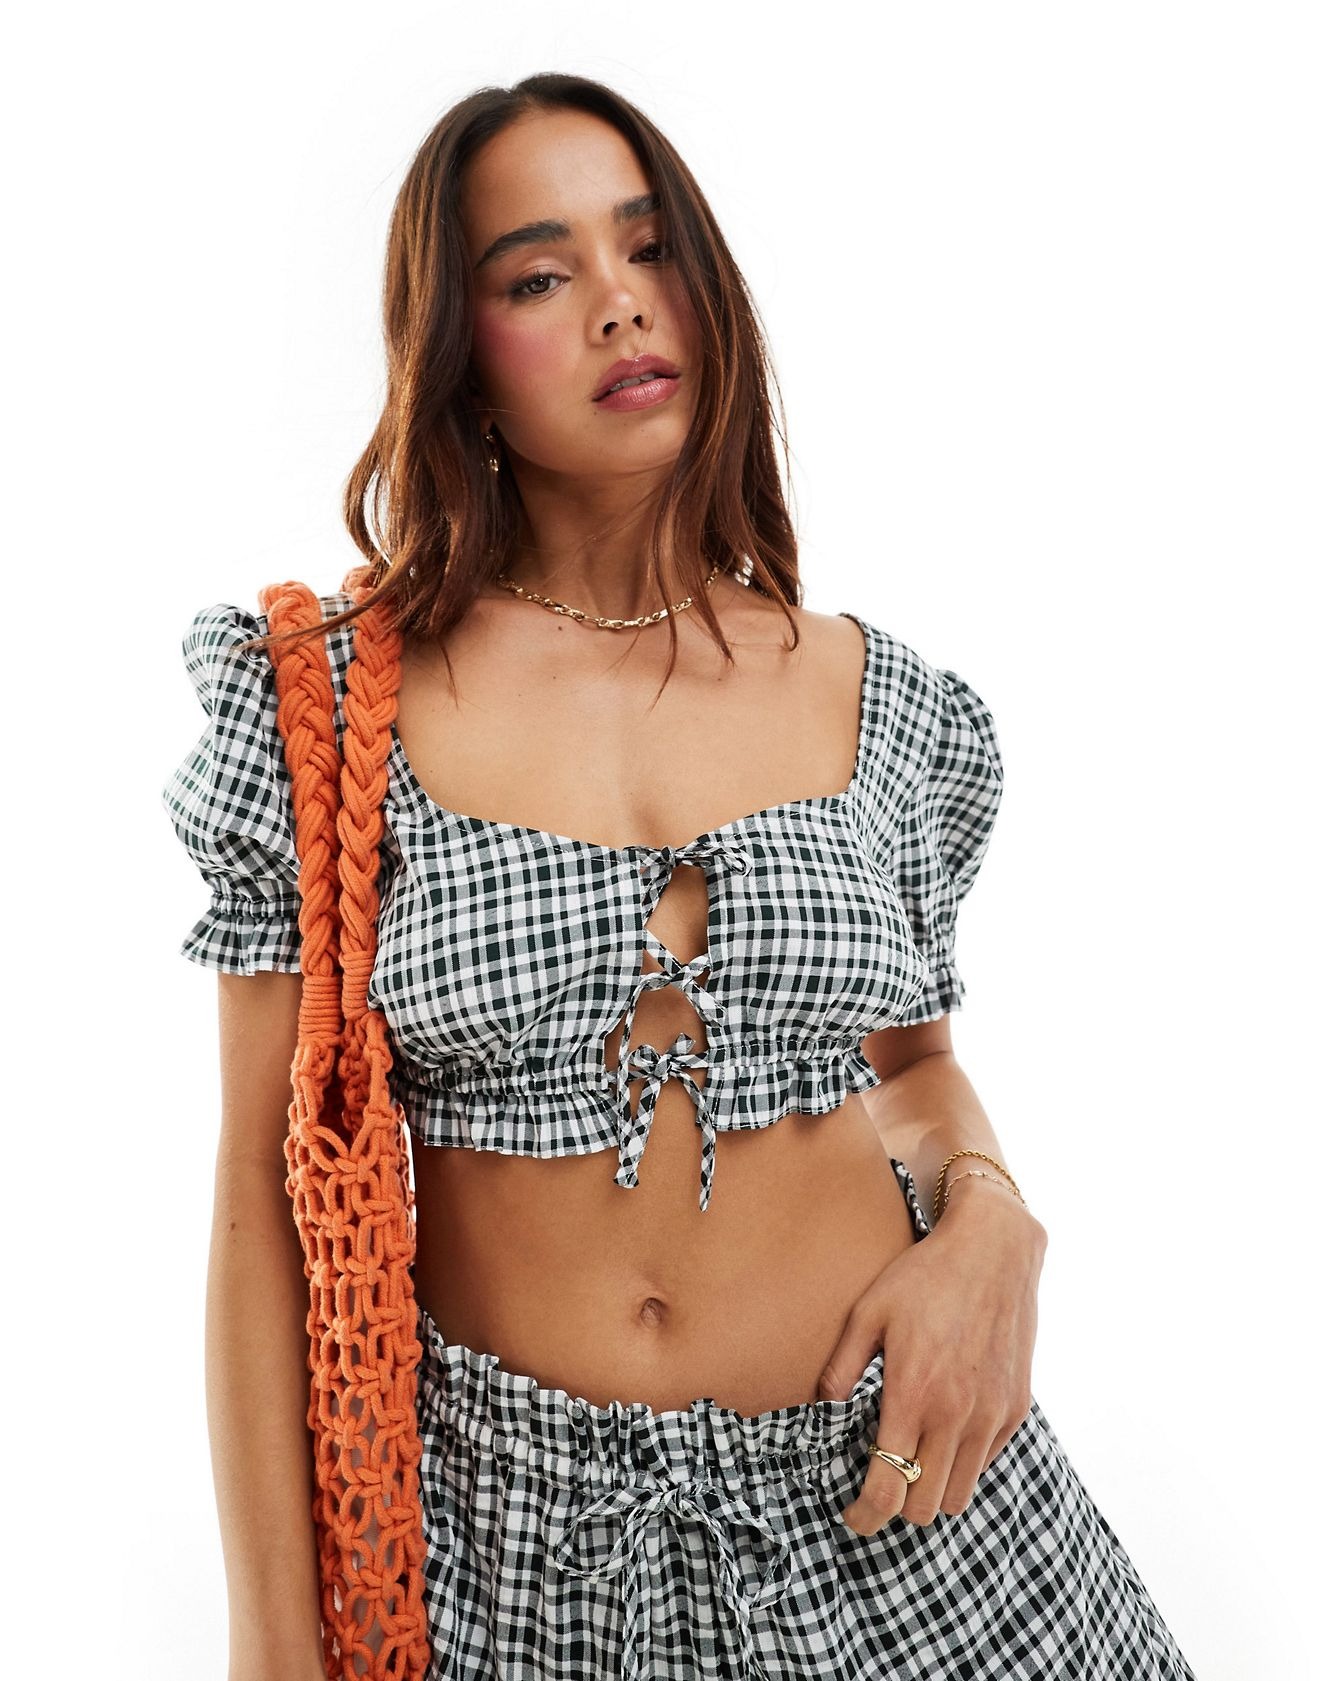 Топ Asos Design Tie Front In Mono Gingham Co-ord, мультиколор топ asos luxe co ord jacquard off shoulder crop in floral мультиколор